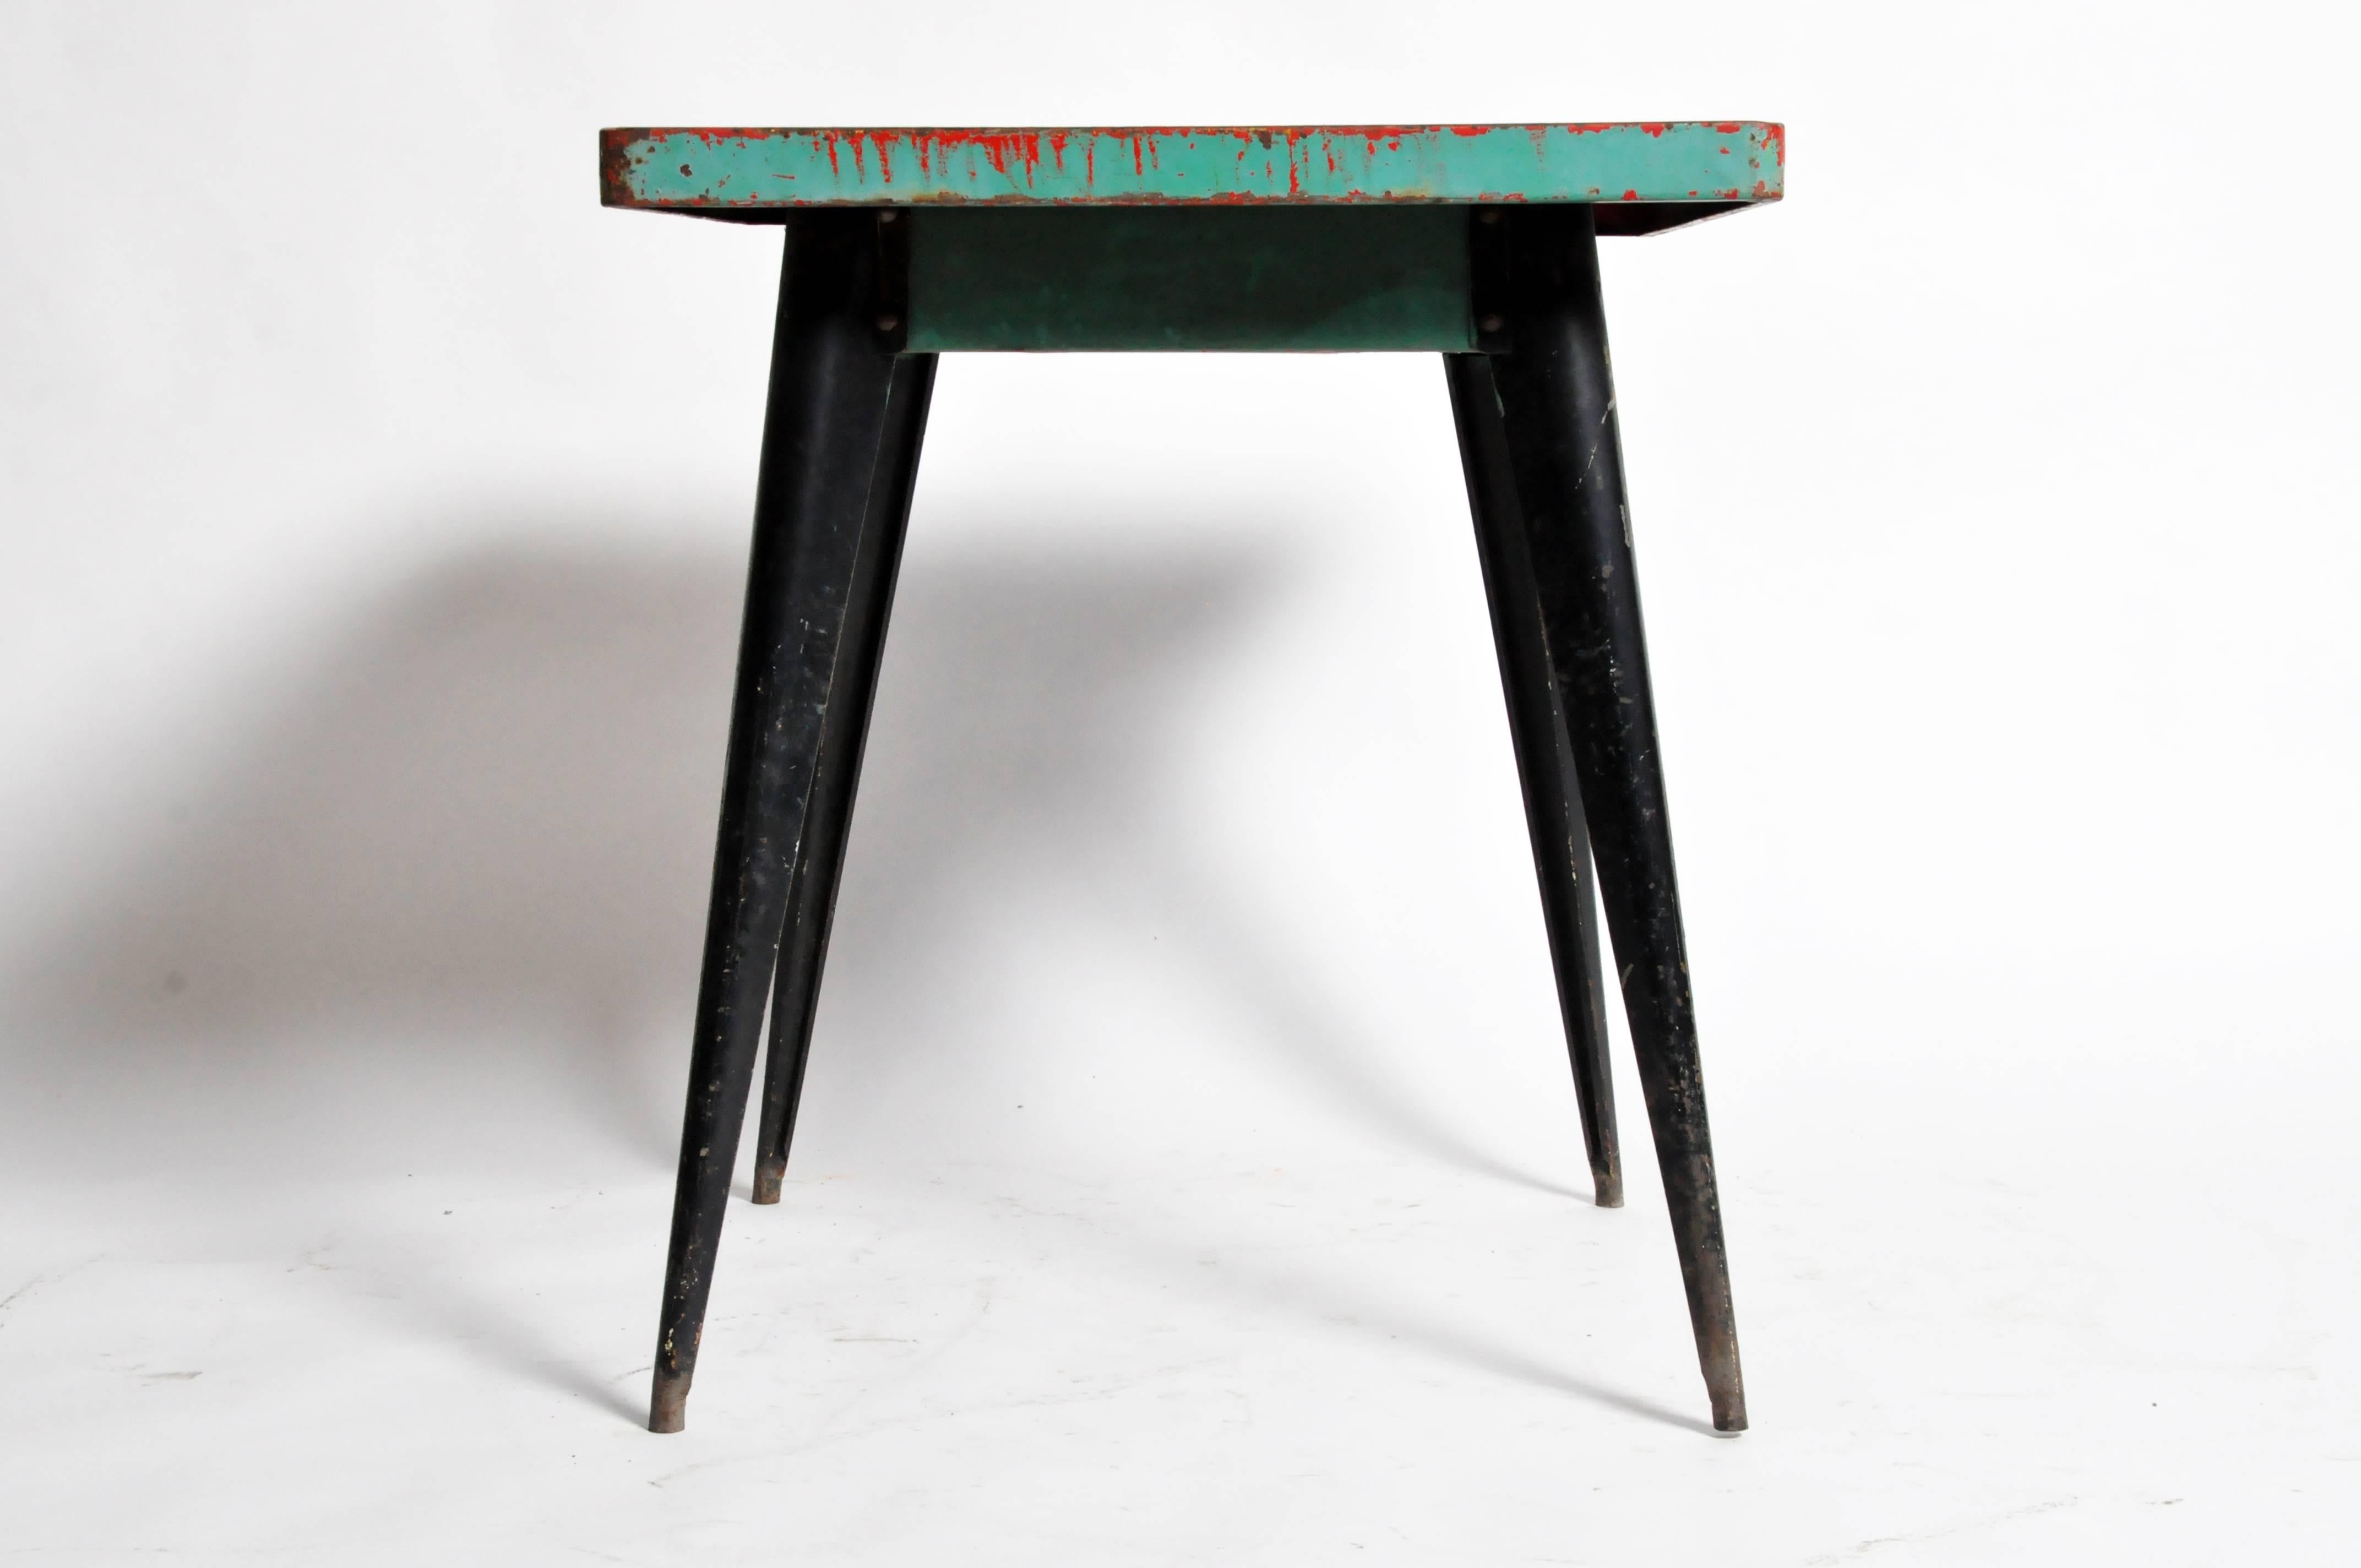 20th Century Mid-Century Modern Green Metal Outdoor Cafe Table by Tolix